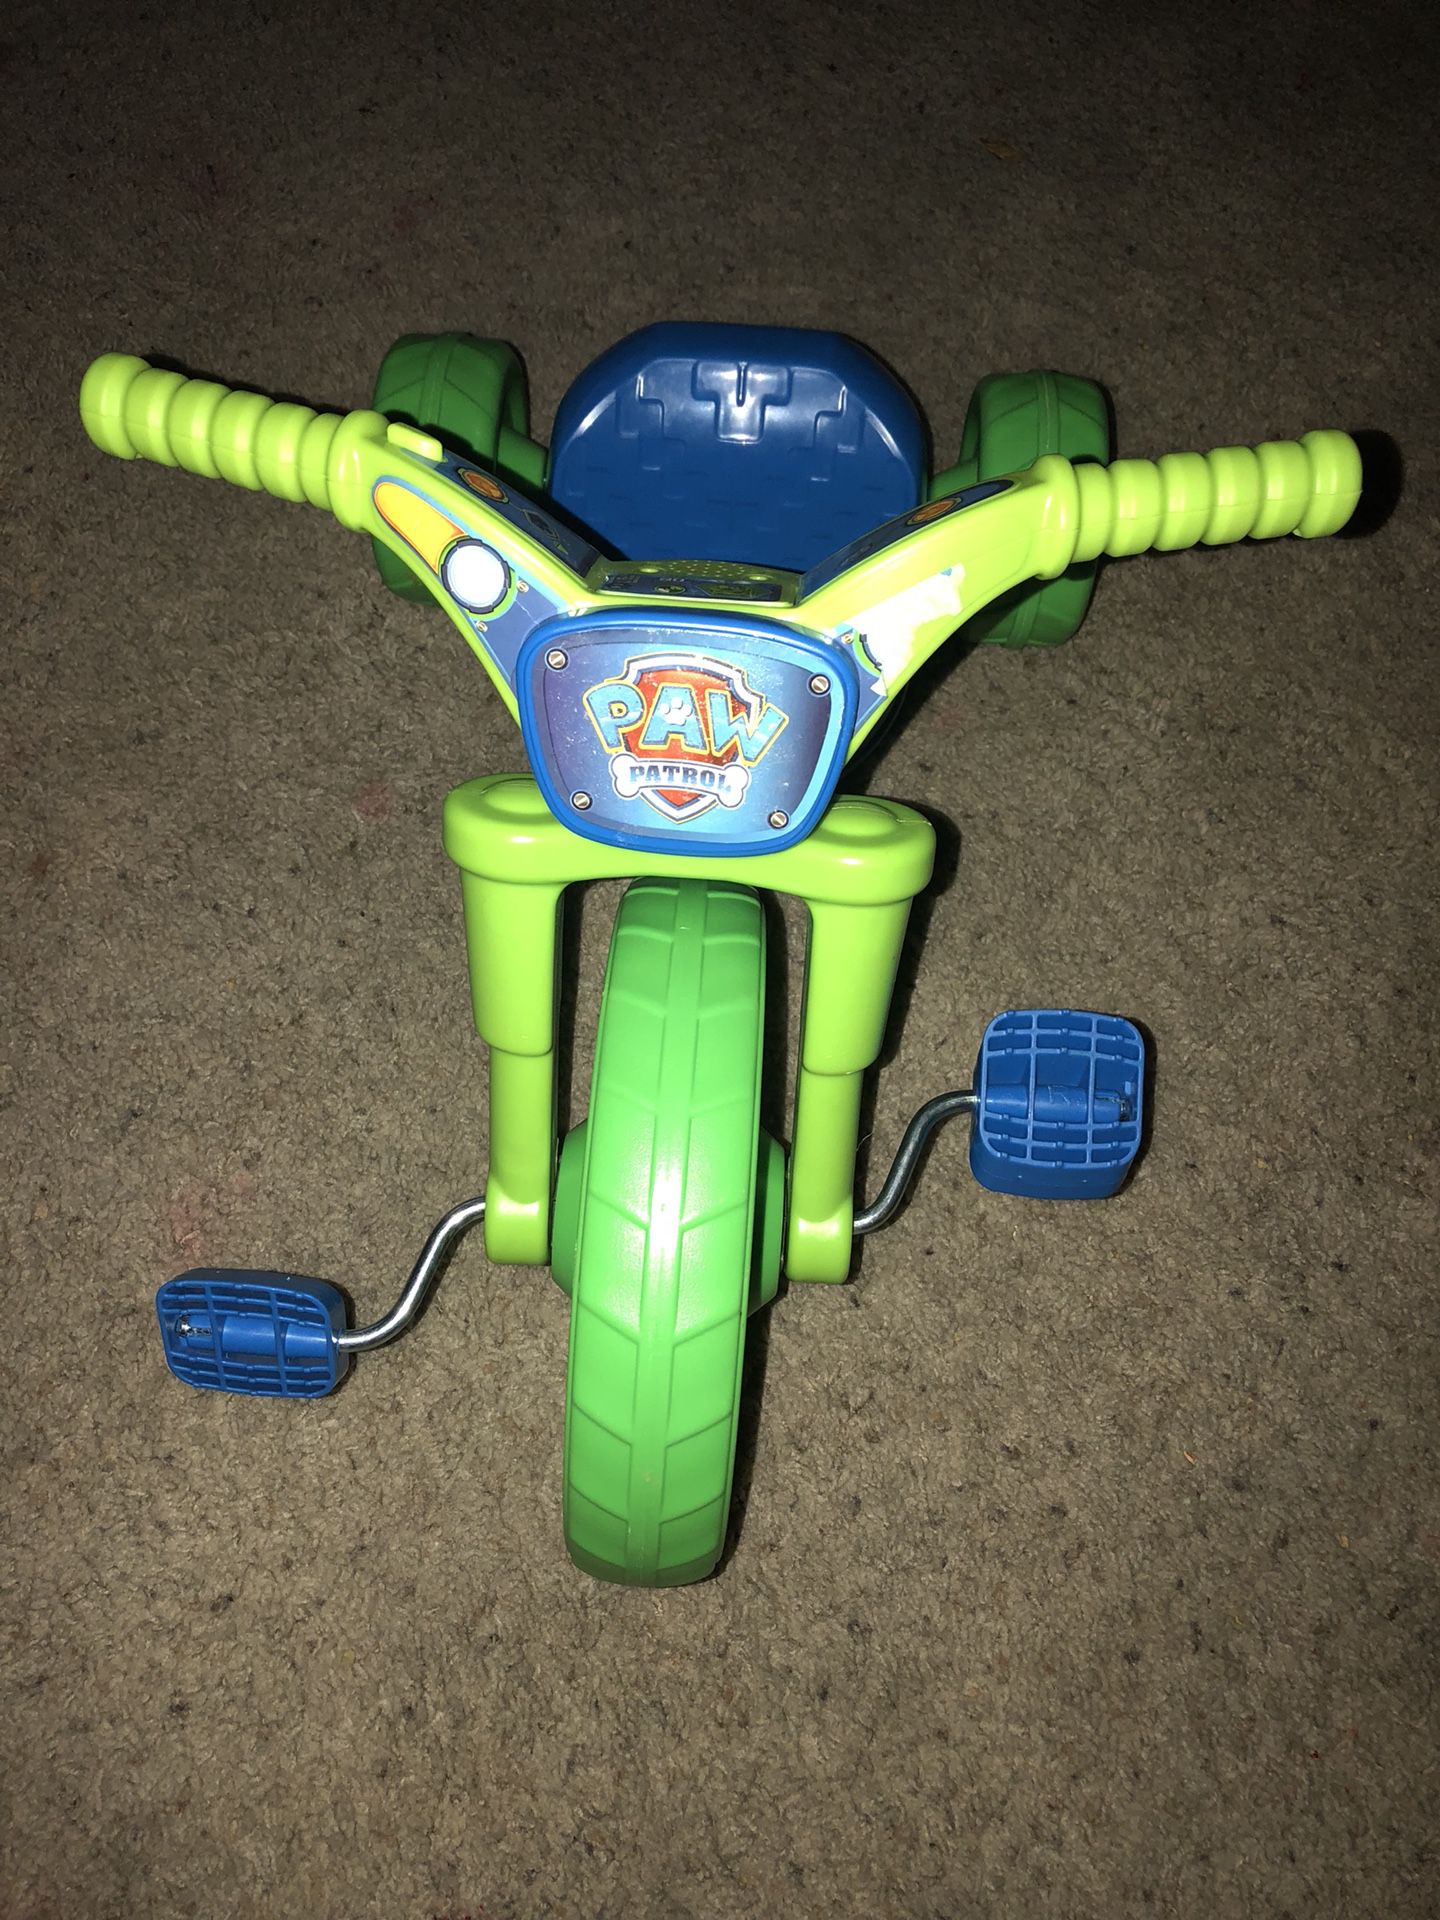 Musical paw patrol trike and helmet. Never used out of box